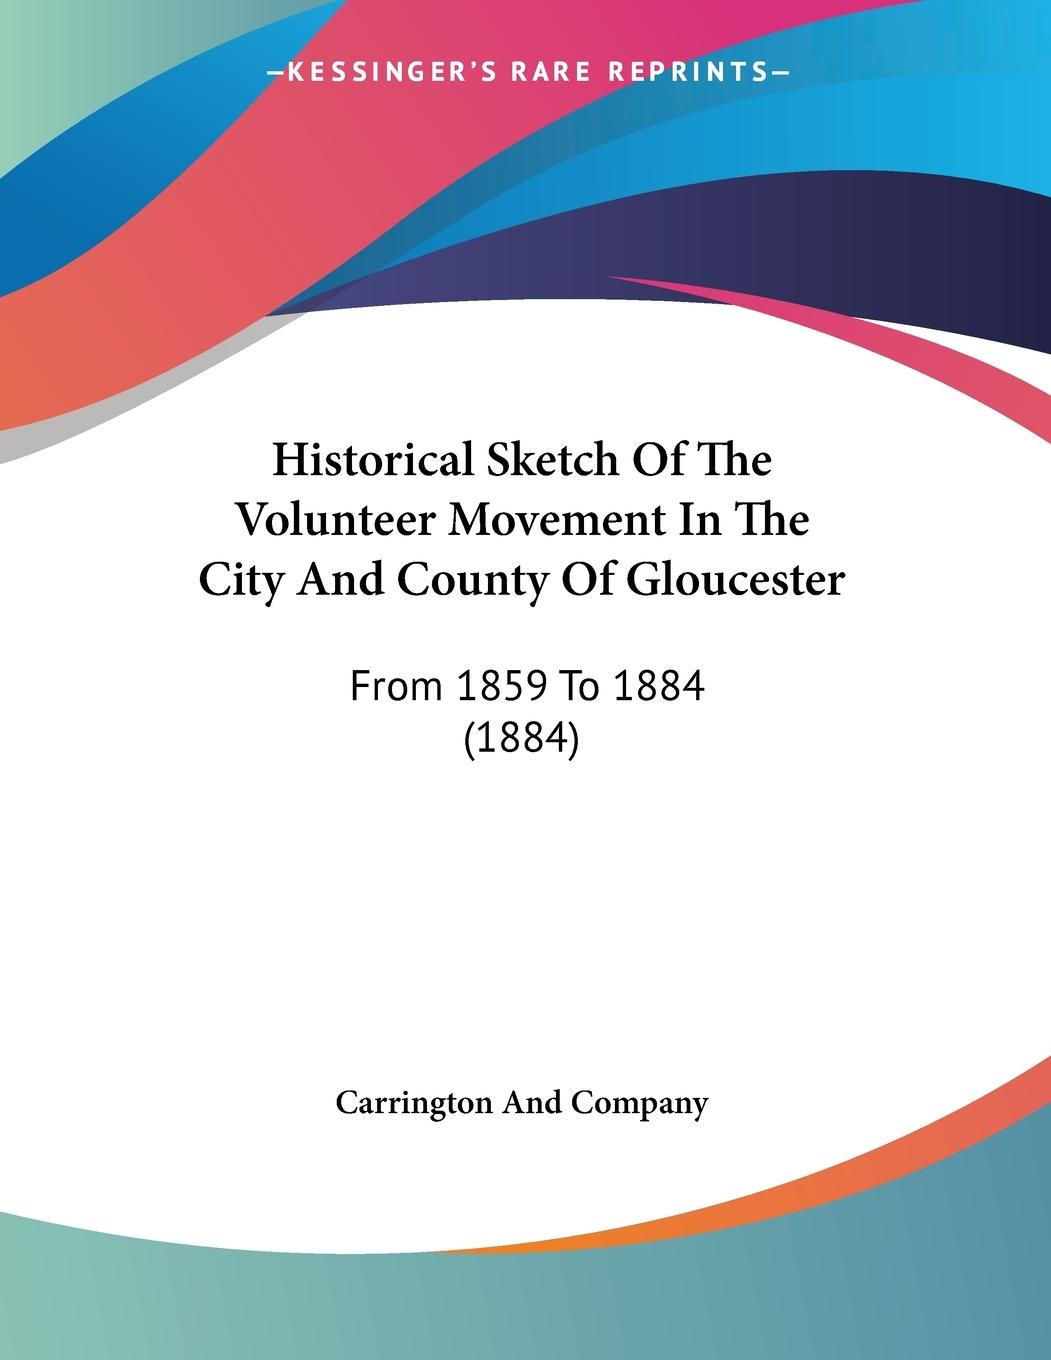 Historical Sketch Of The Volunteer Movement In The City And County Of Gloucester - Carrington And Company